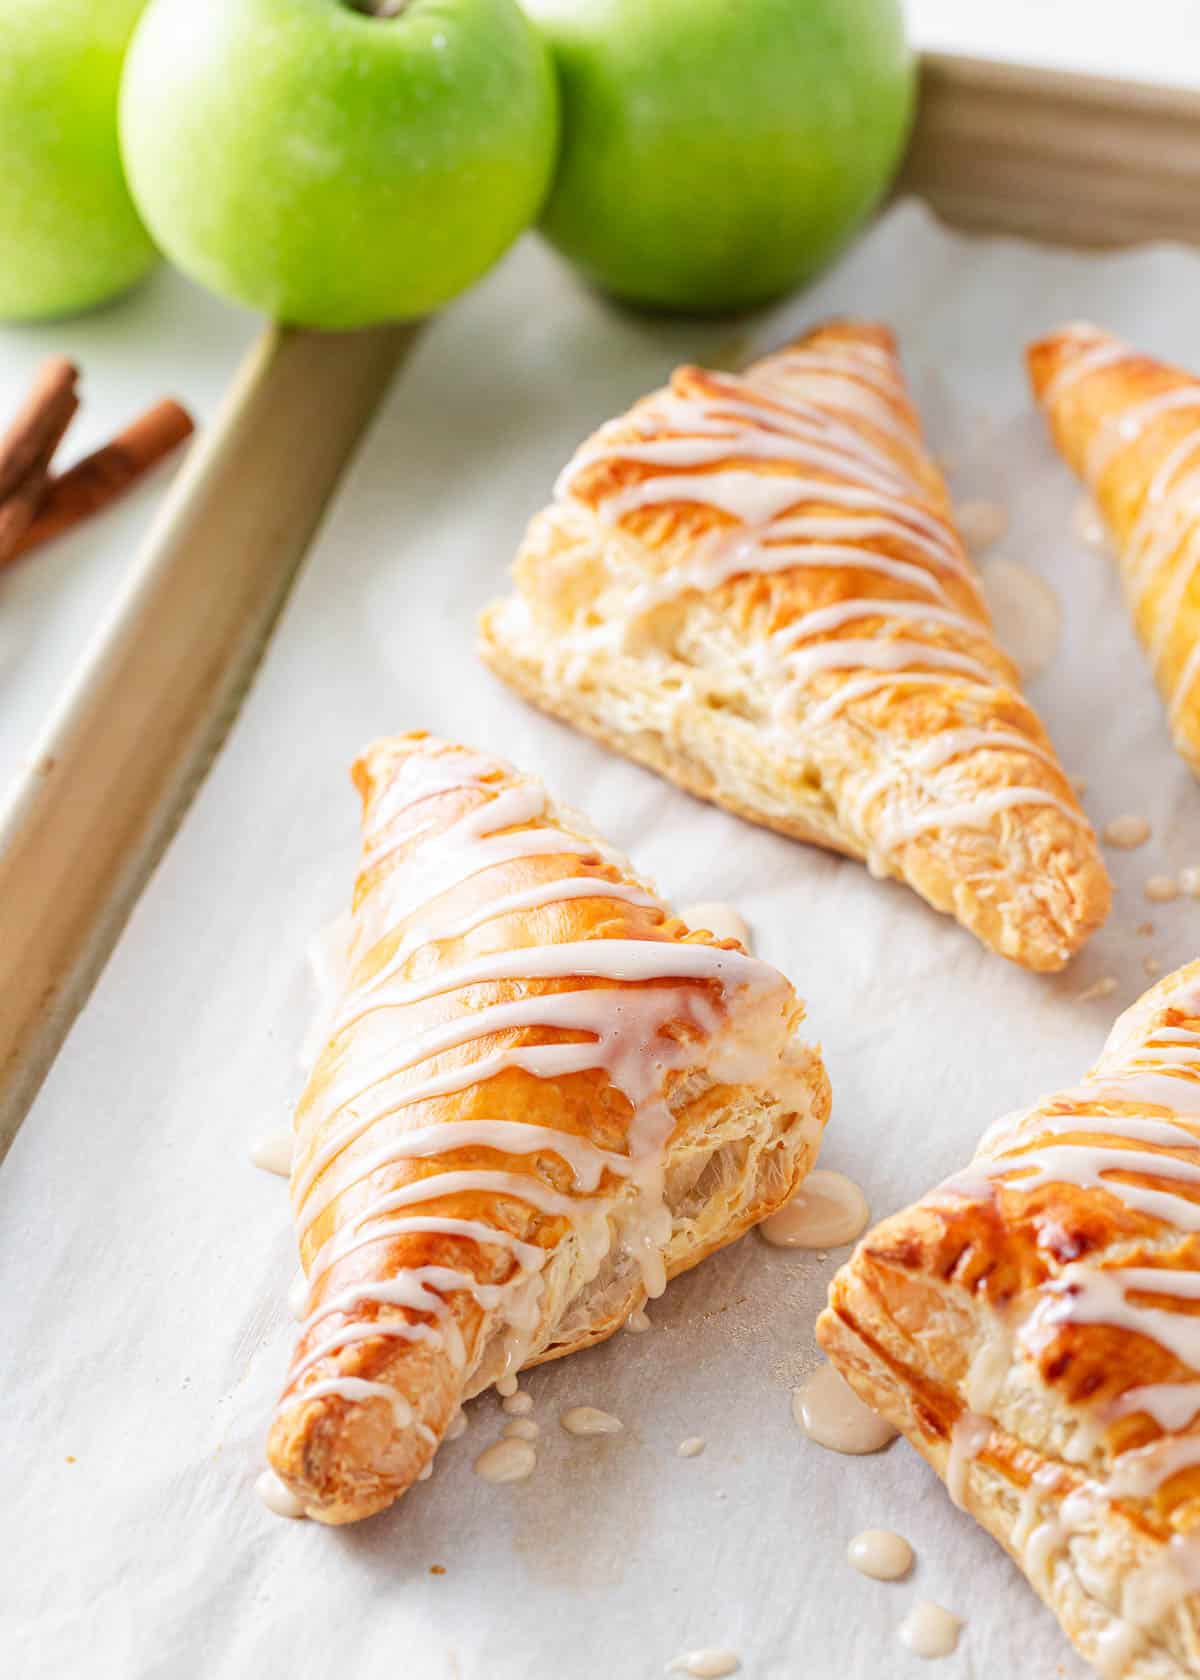 Apple turnovers on a baking sheet.